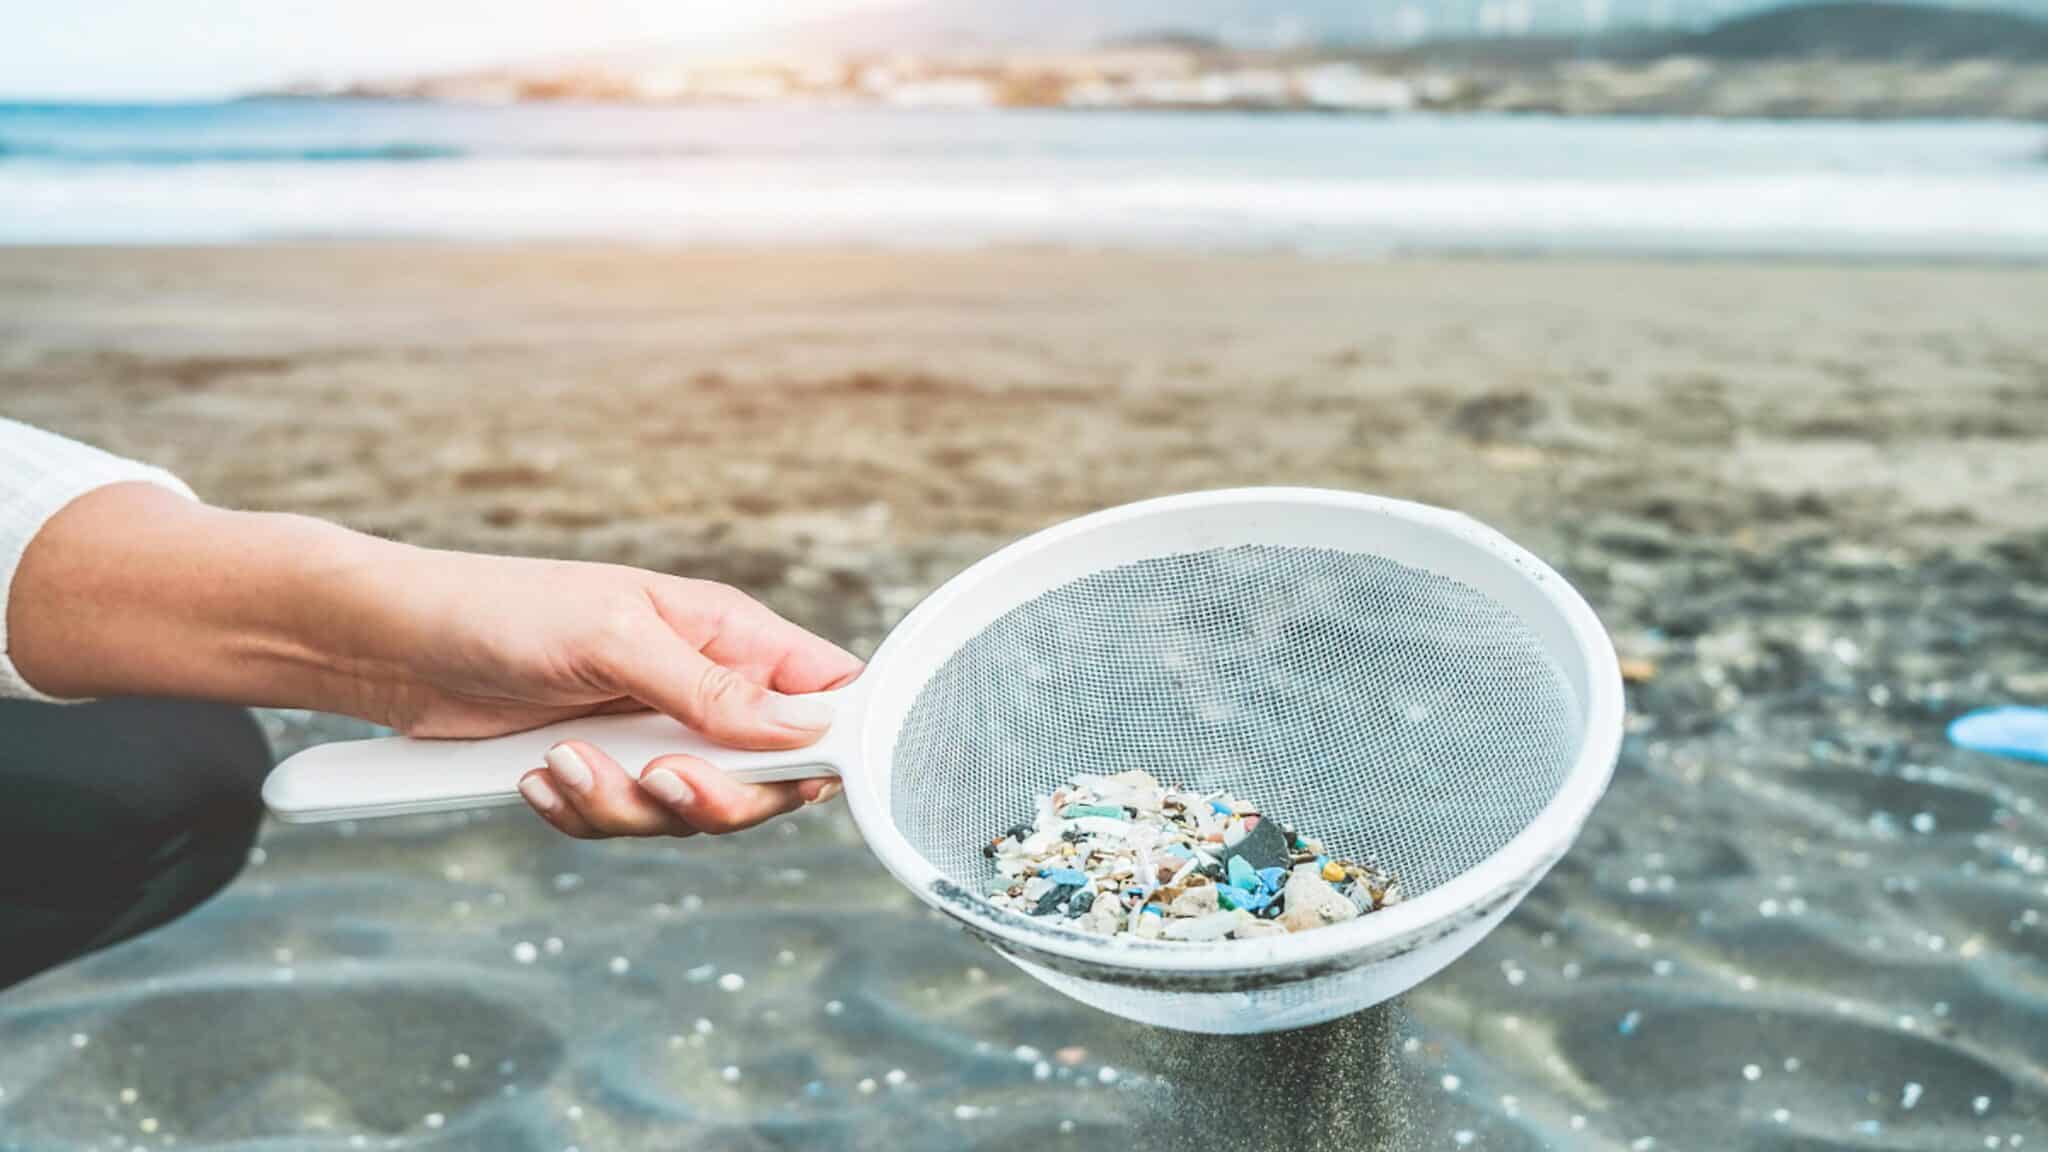 Biden EPA Appears to Side With Chemical Industry in Microplastics Health Conflict: Greenpeace Investigation